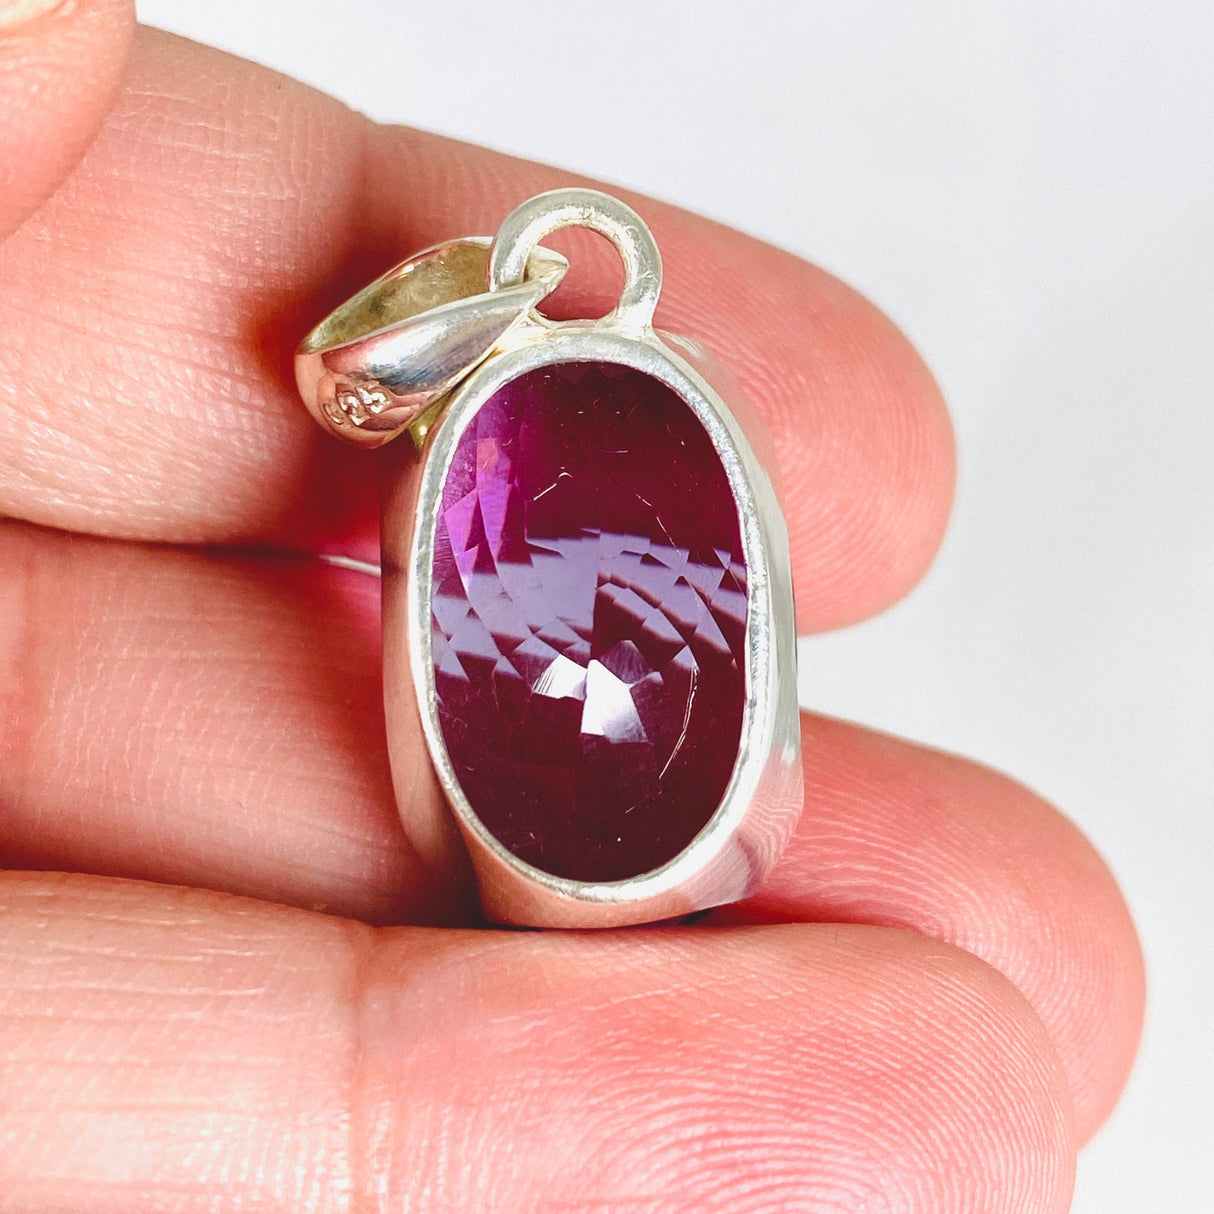 Amethyst faceted oval pendant KPGJ3932 - Nature's Magick